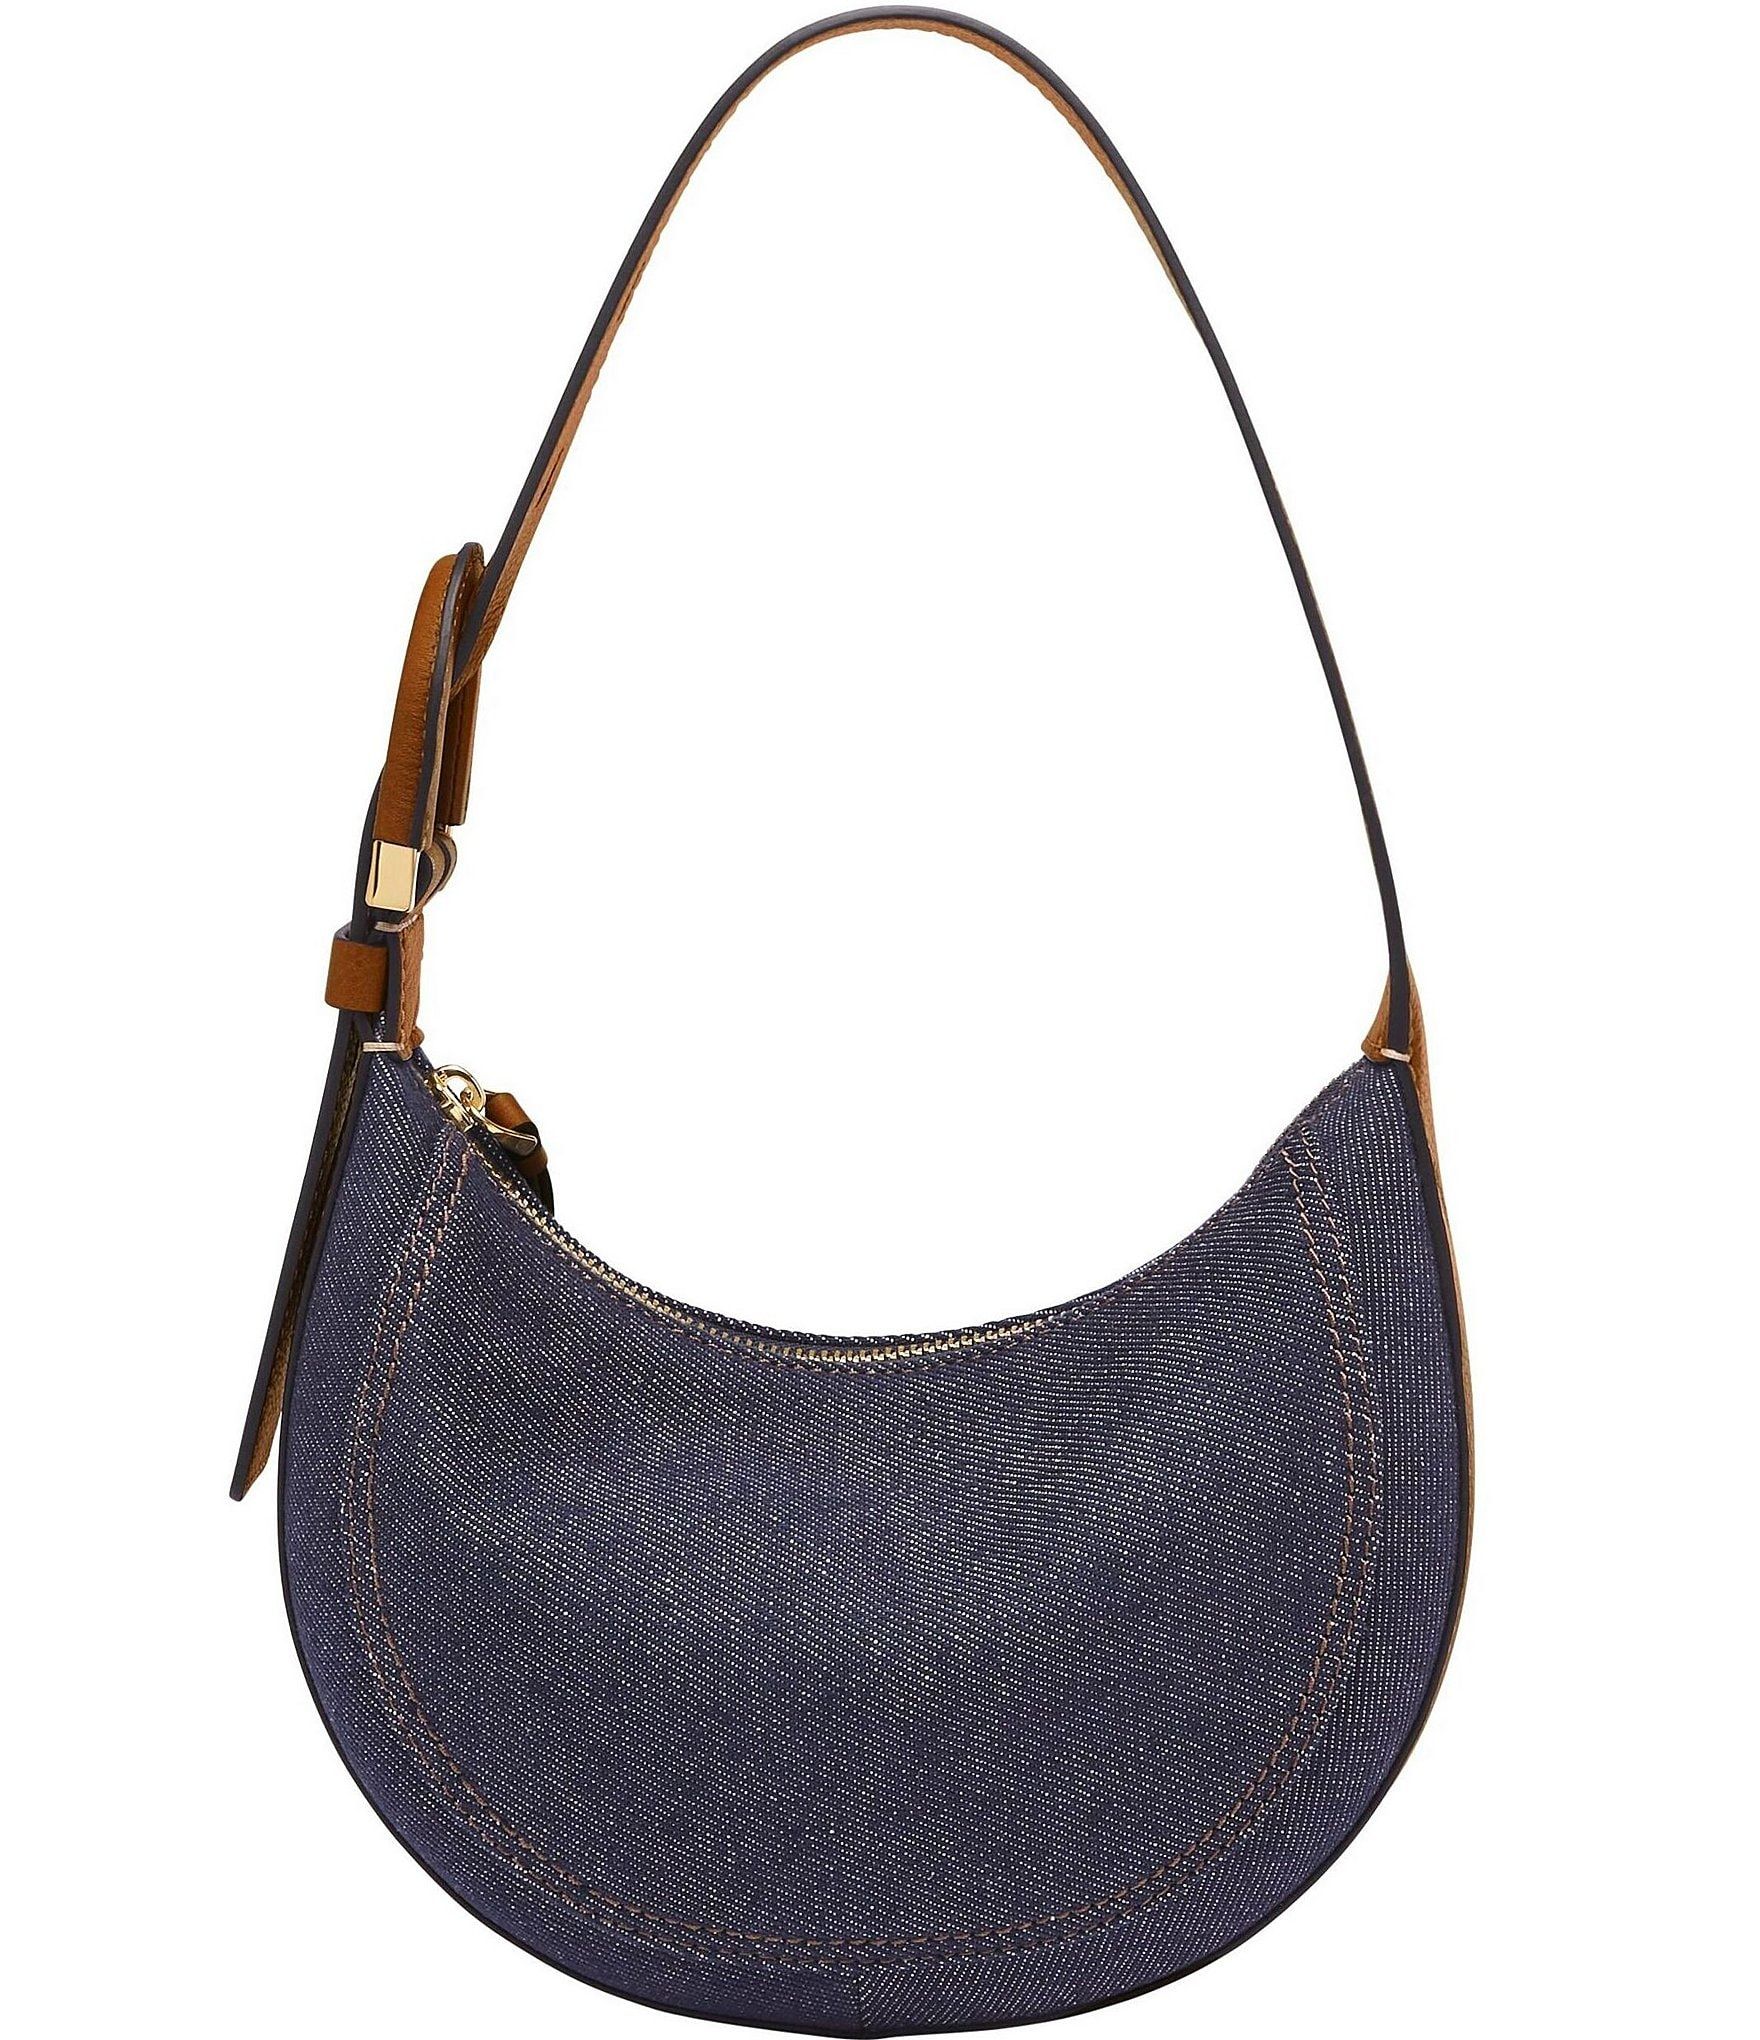 Accessorize in Style: Fossil Bags for Every Occasion